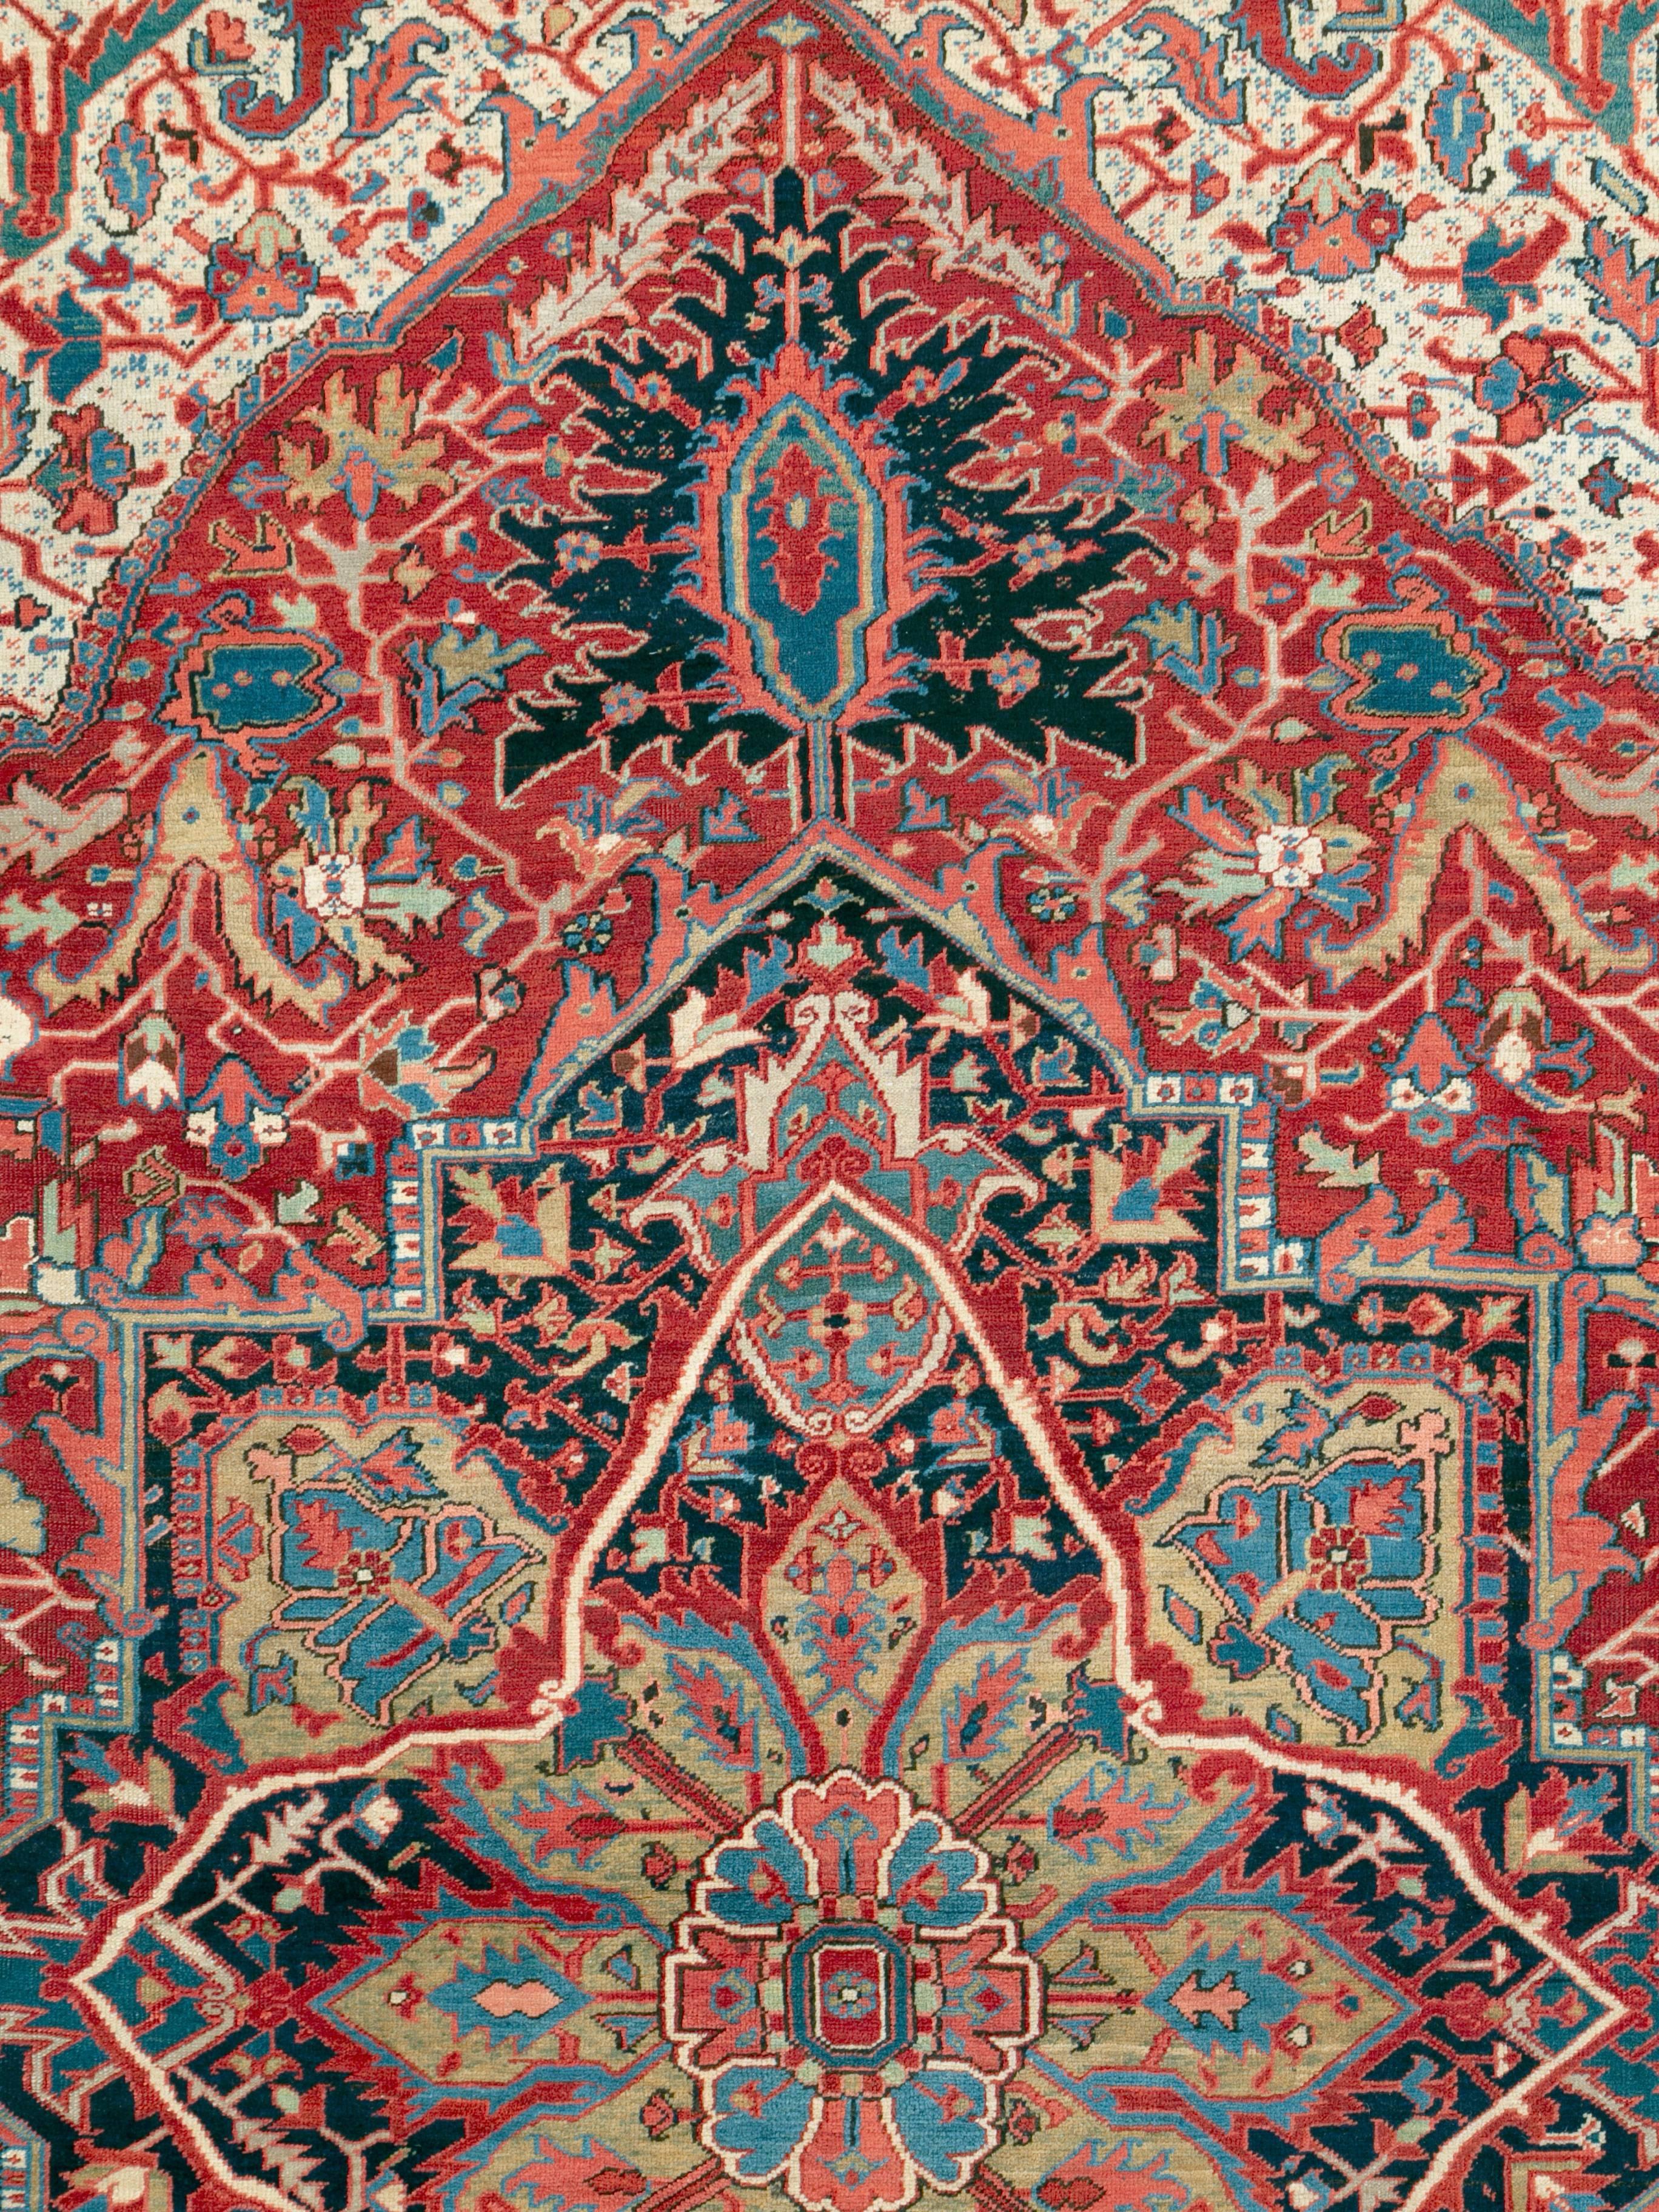 An antique Persian Heriz rug from the early 20th century.

Measures: 11' 8